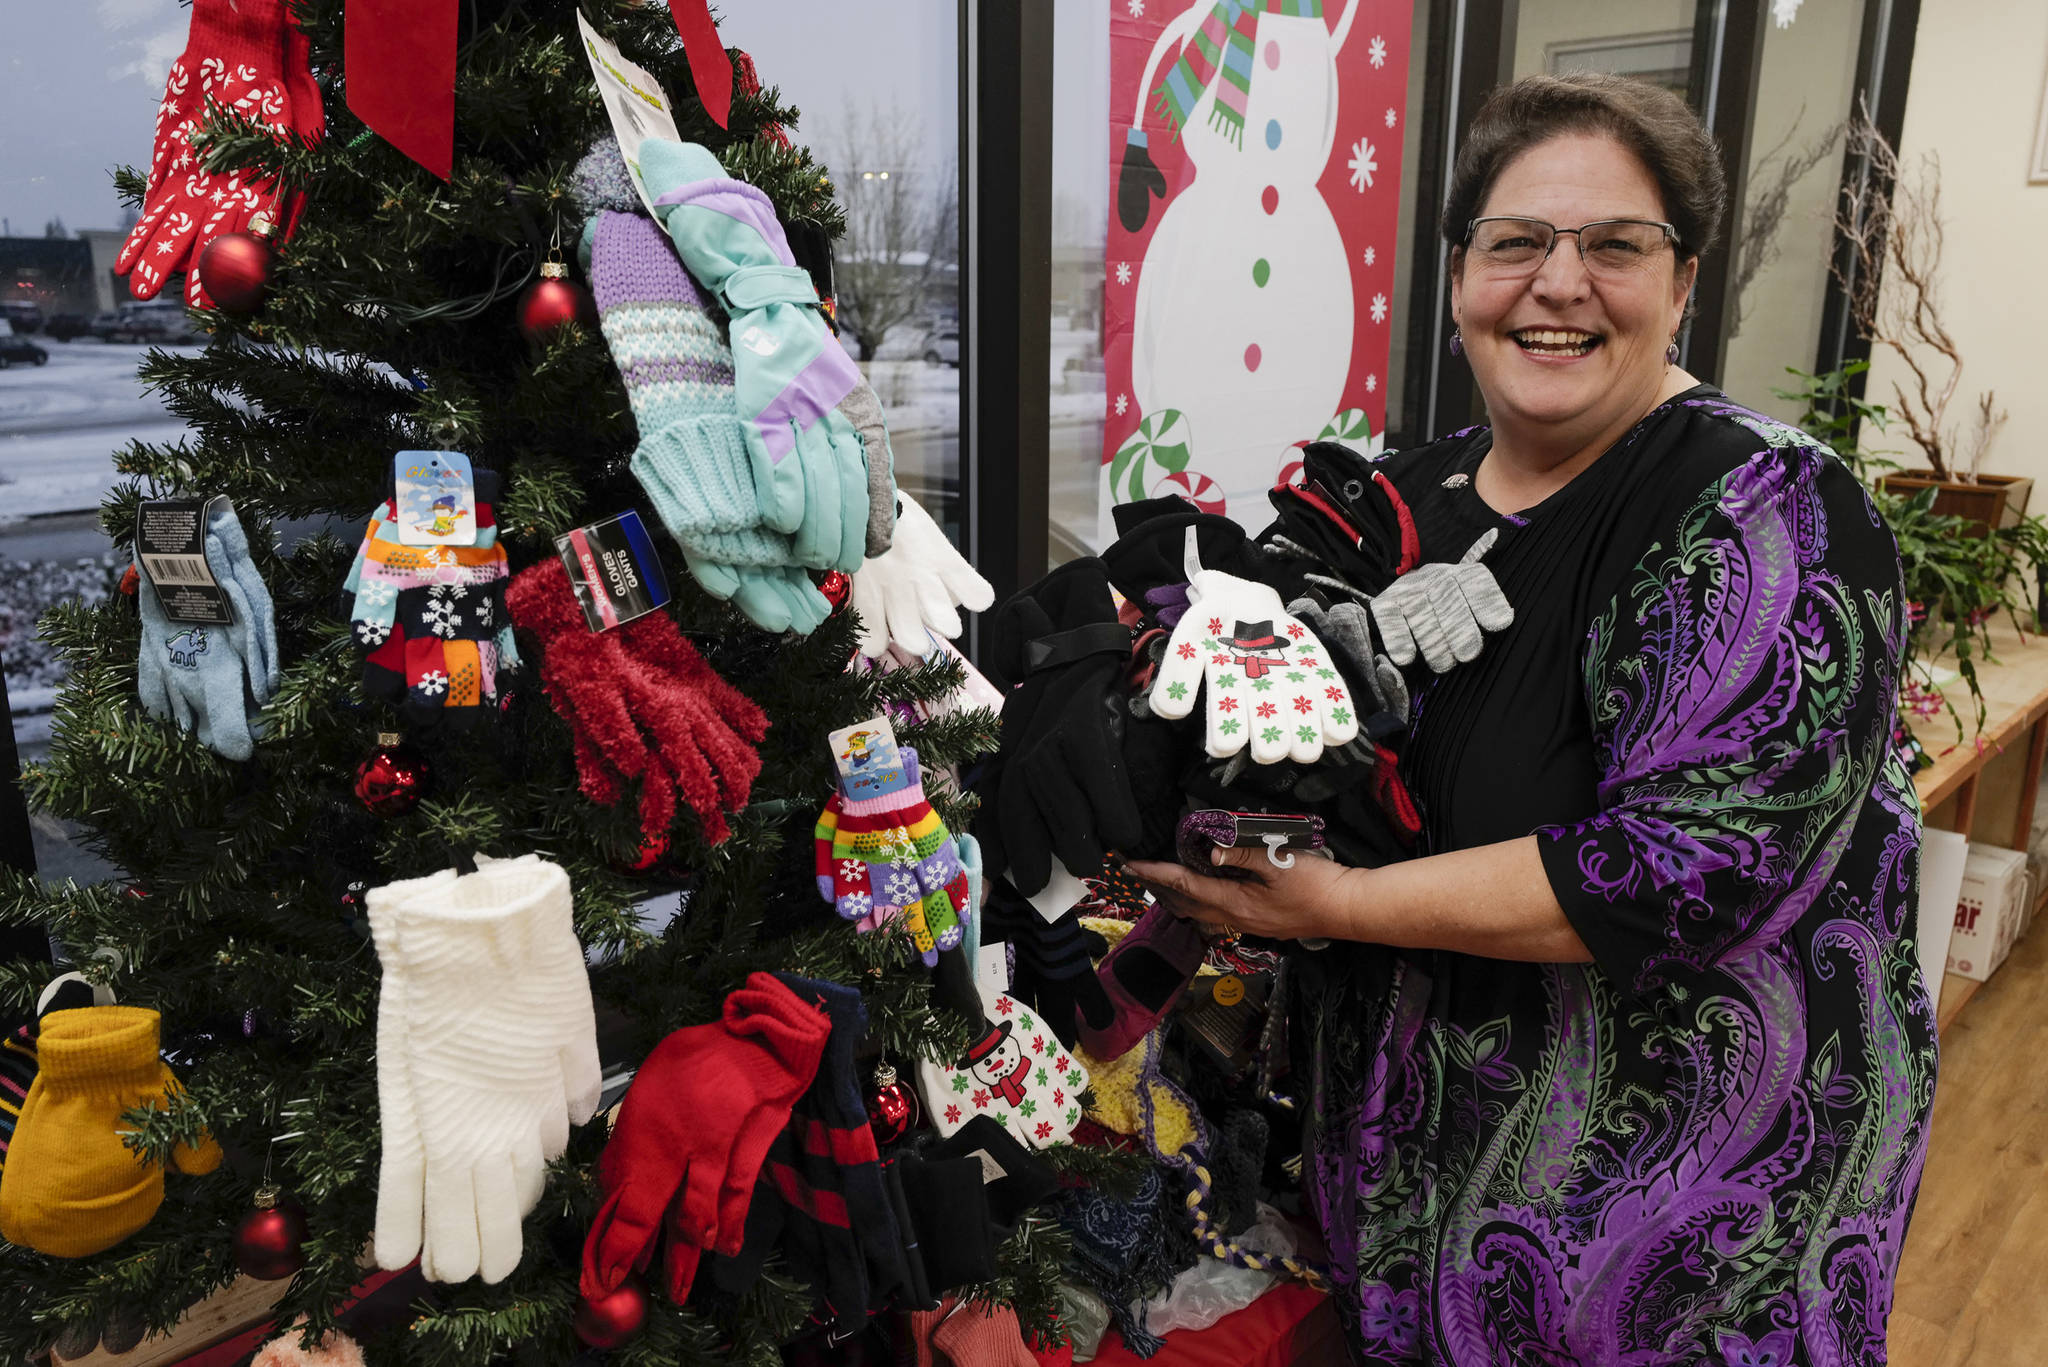 ‘A little labor of love:’ Realtor brings in 700 gloves for kids